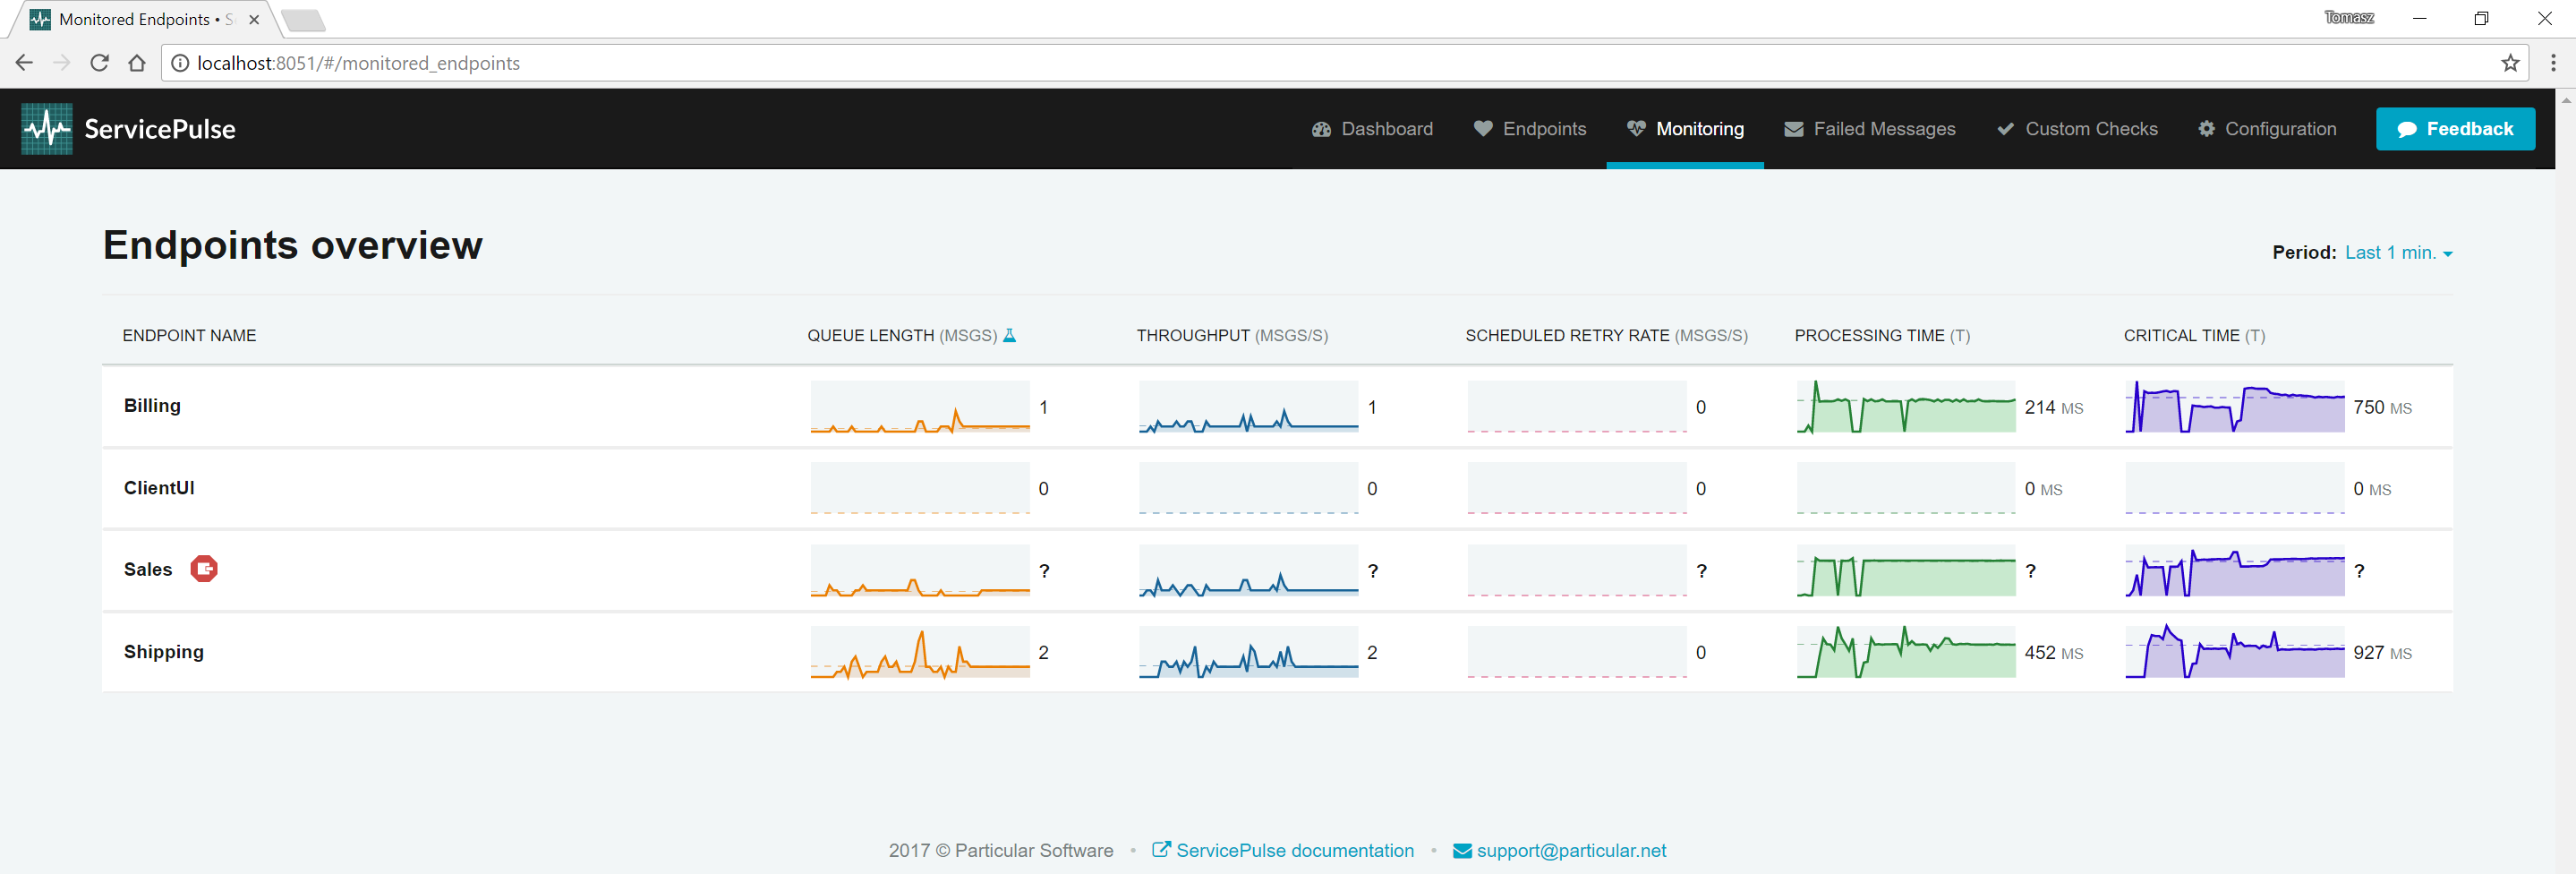 ServicePulse Monitoring tab showing the instance of Sales endpoint has stopped sending data